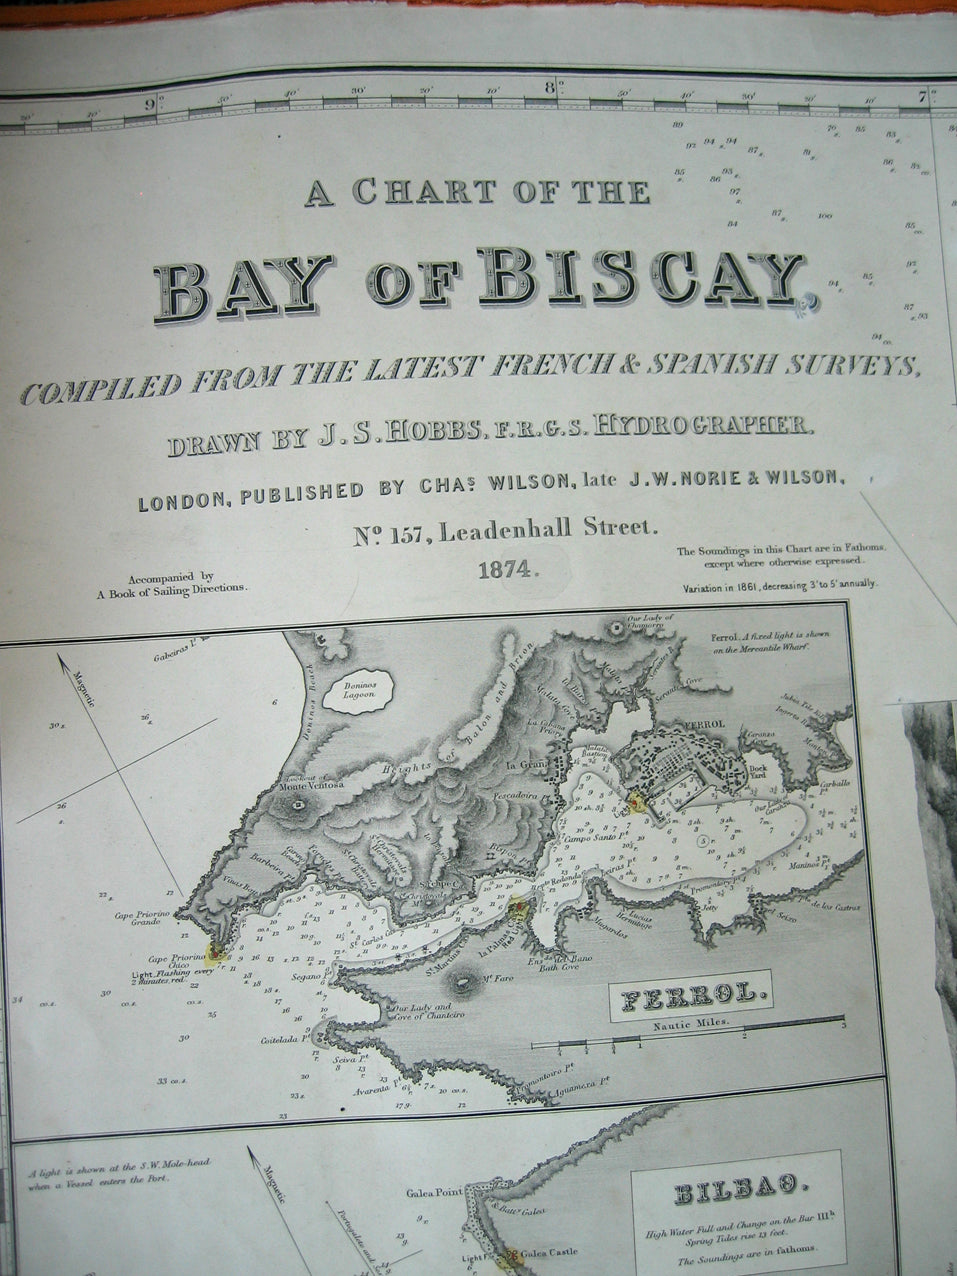 Norie & Wilson: A Chart of the Bay of Biscay, Compiled by the latest French an Spanish Surveys, 1874